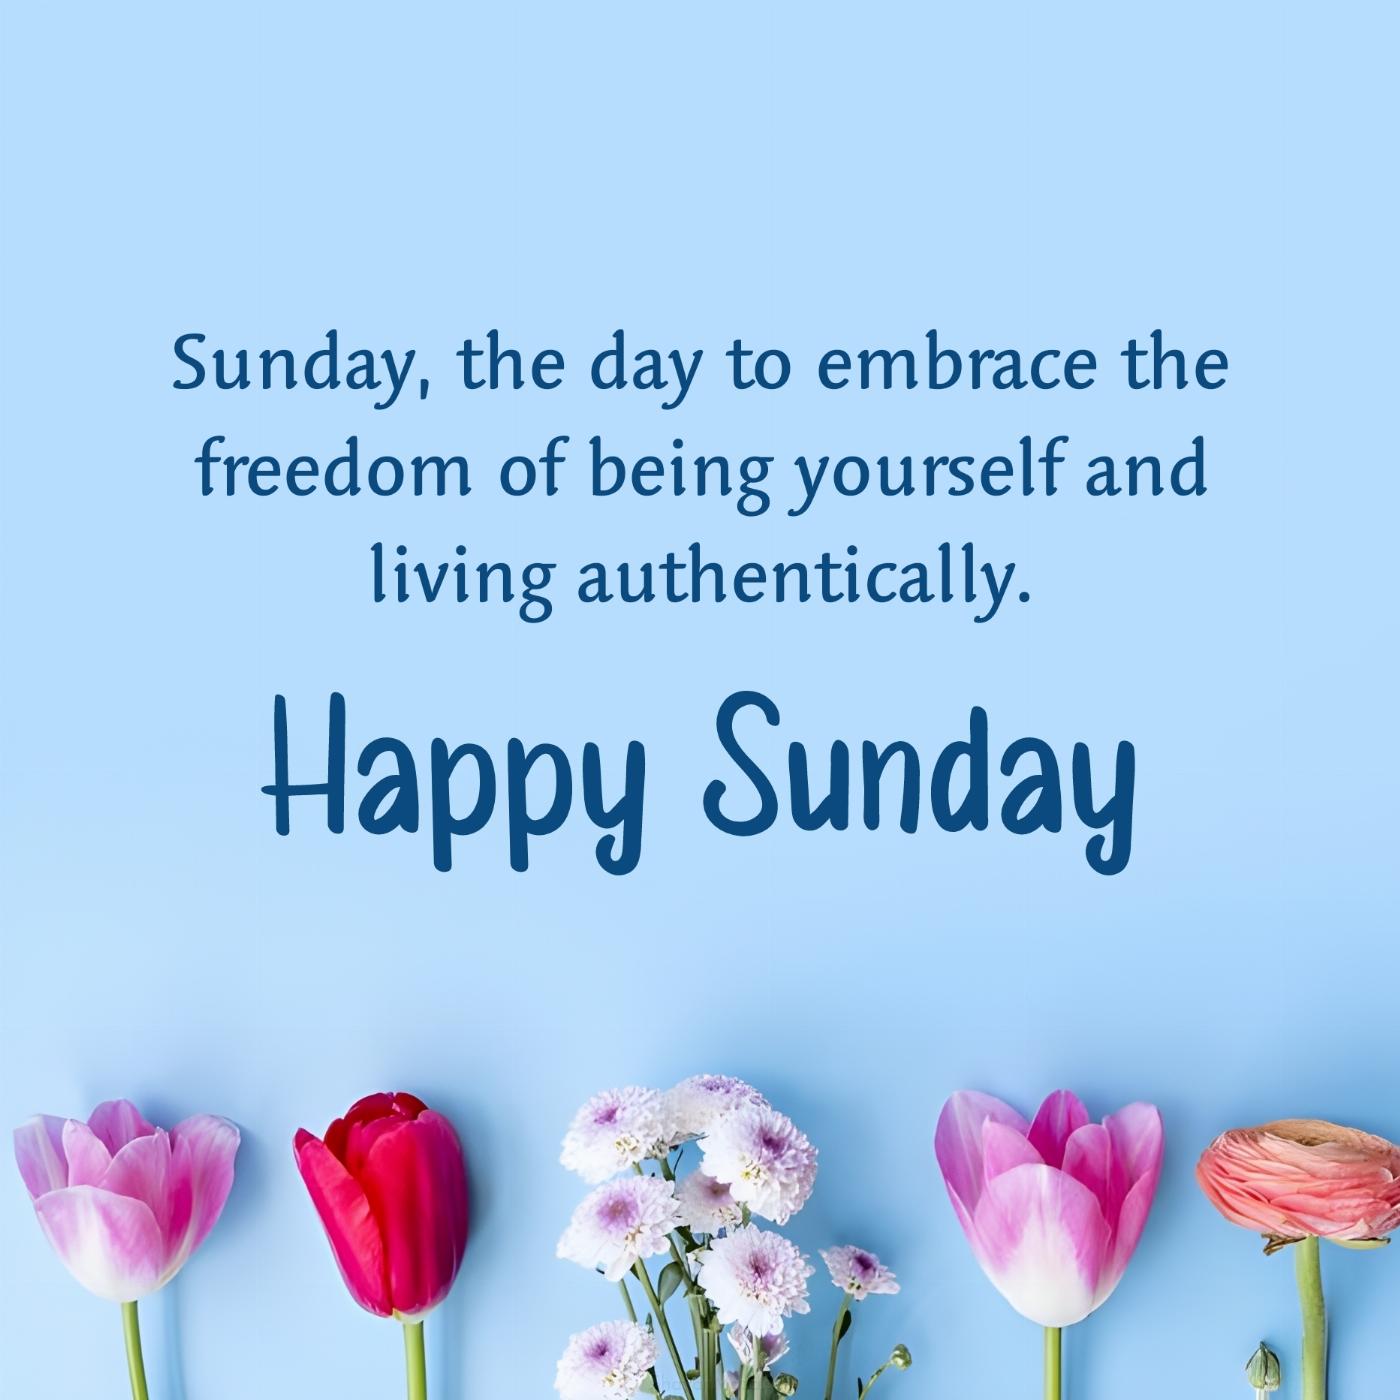 Sunday the day to embrace the freedom of being yourself